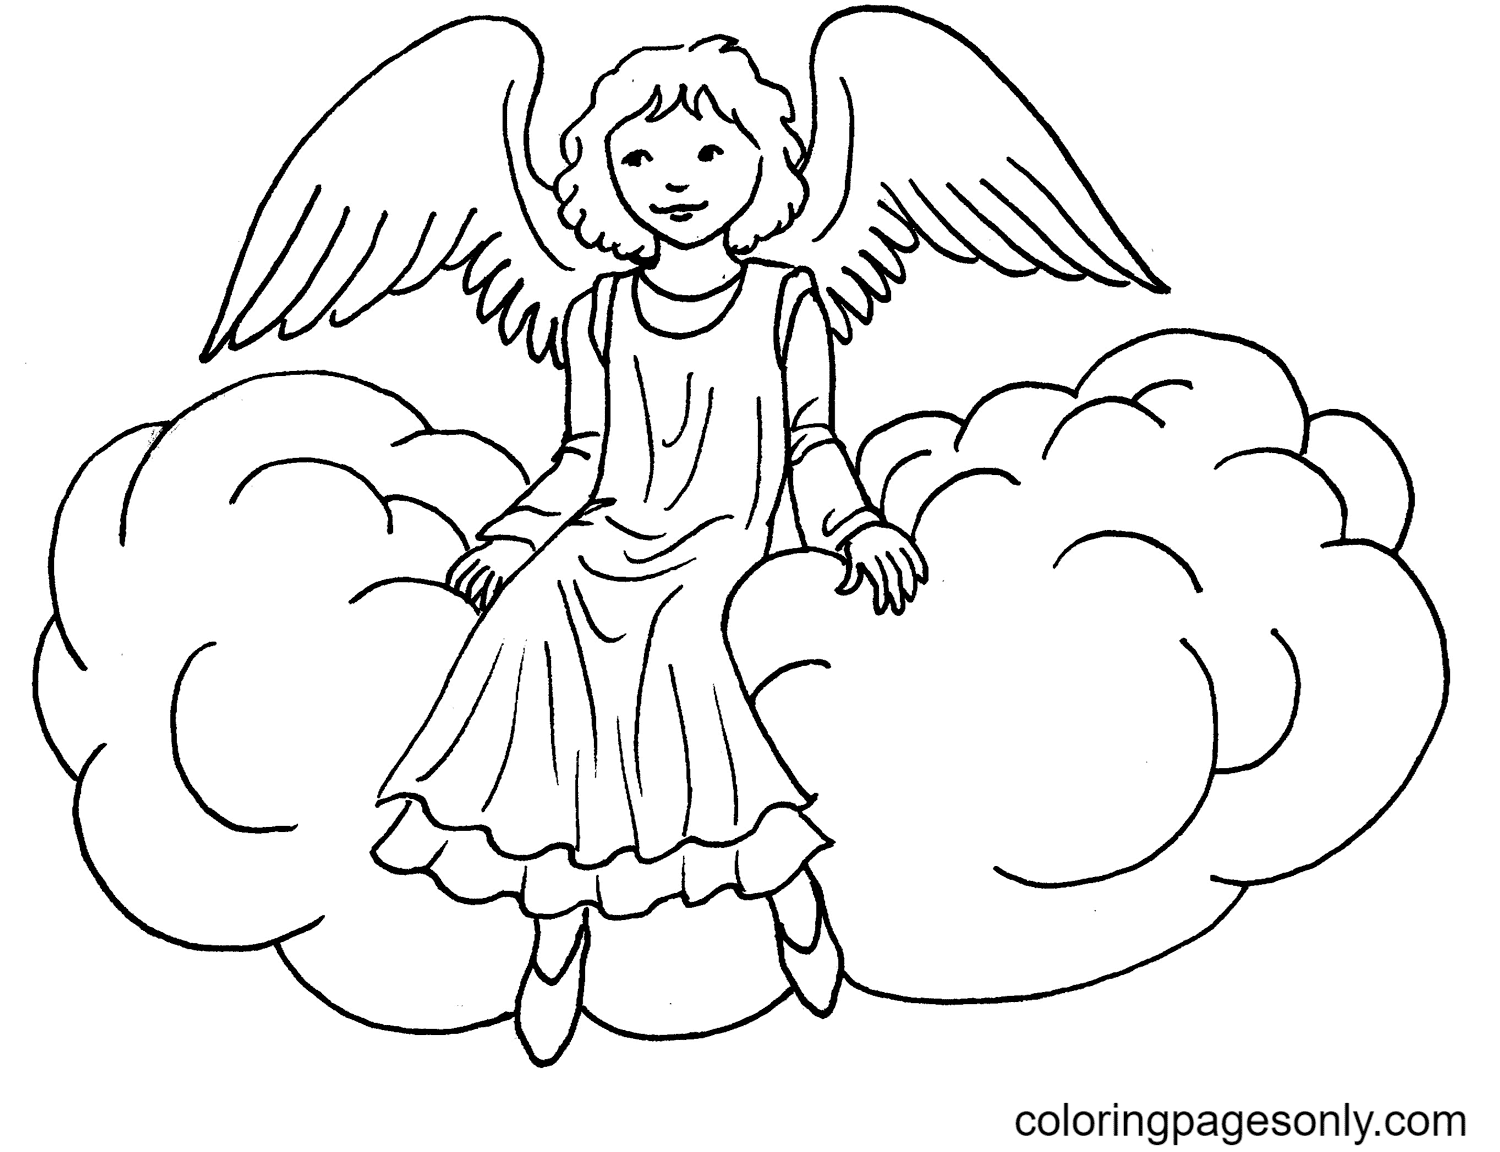 Angel Sitting on Cloud Coloring Pages